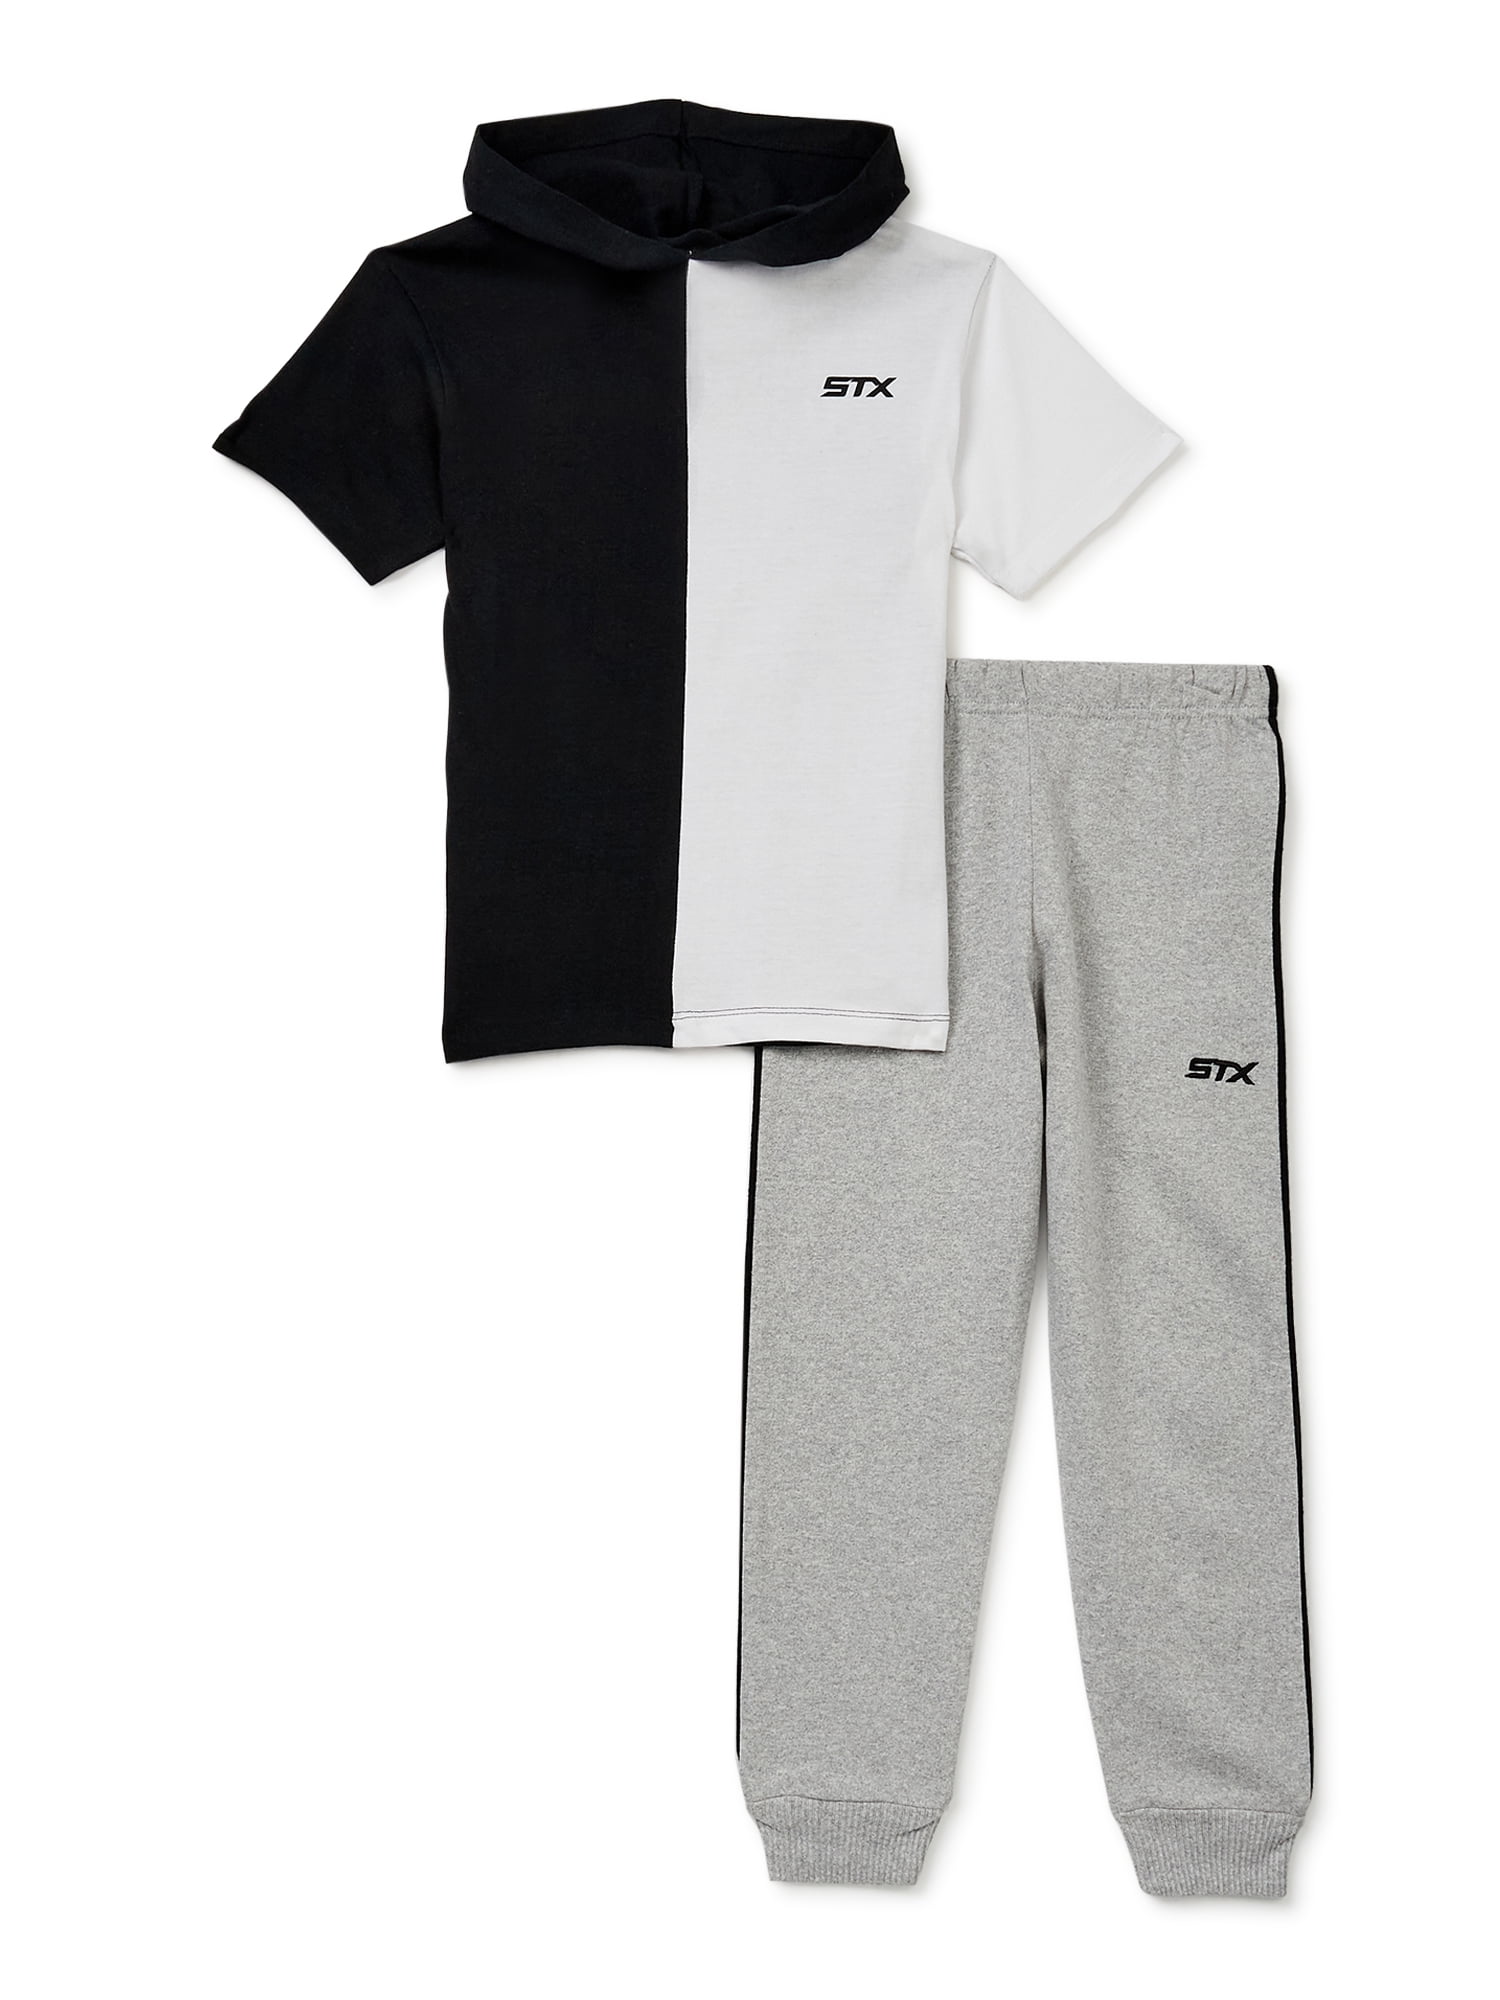 Hind Boys Athleisure T-Shirt and Jogger Track Set Toddler/Little/Big Boys 2 Full Sets